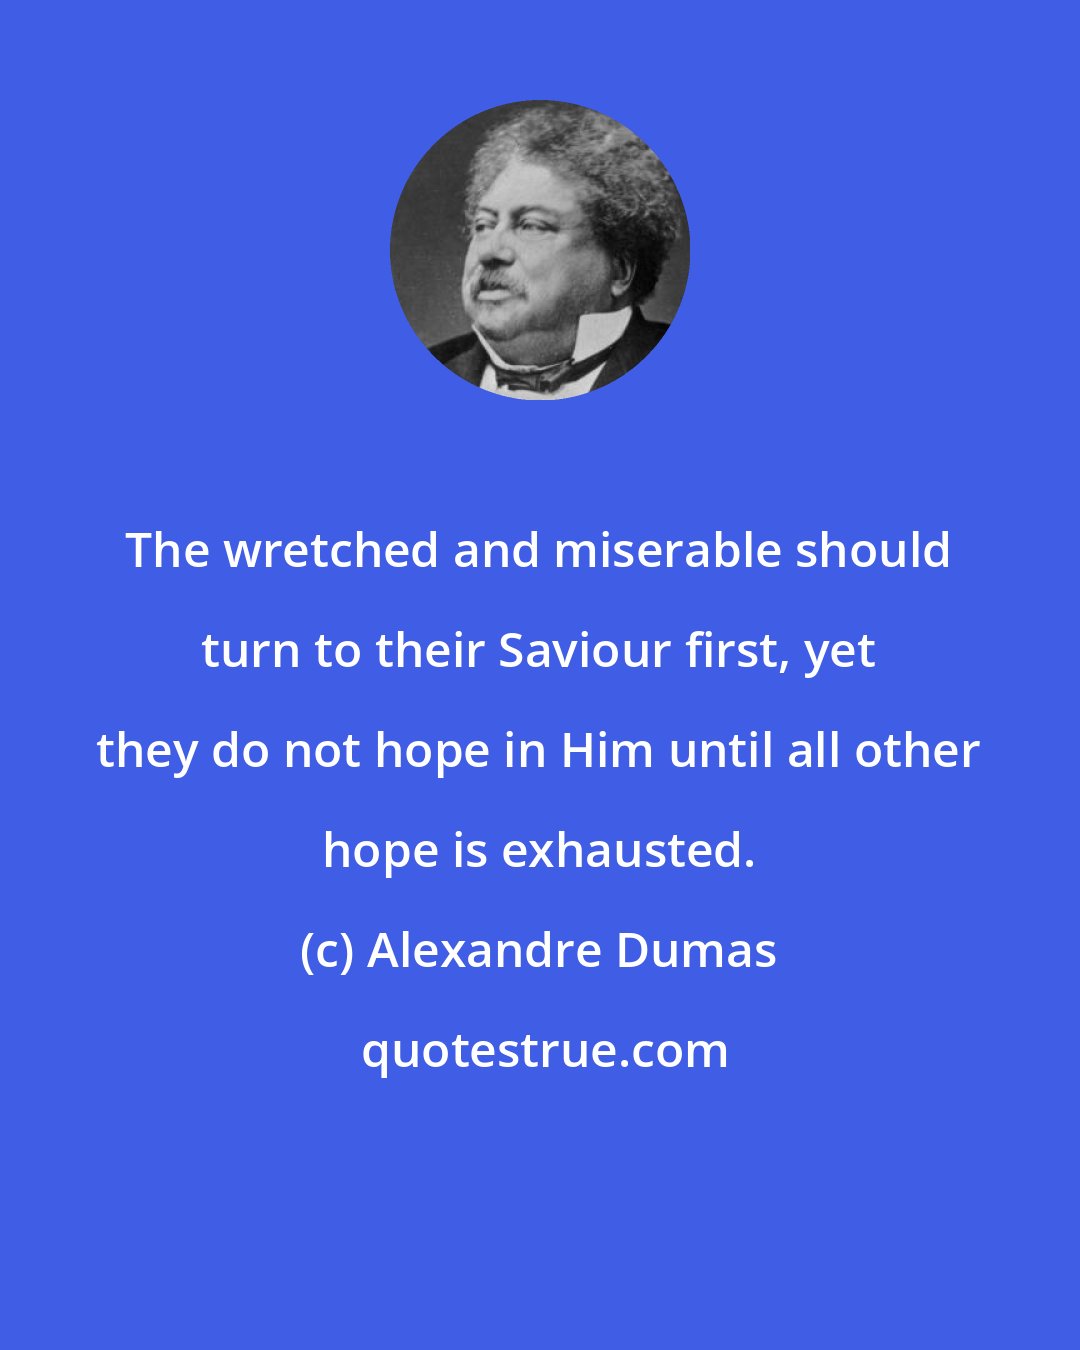 Alexandre Dumas: The wretched and miserable should turn to their Saviour first, yet they do not hope in Him until all other hope is exhausted.